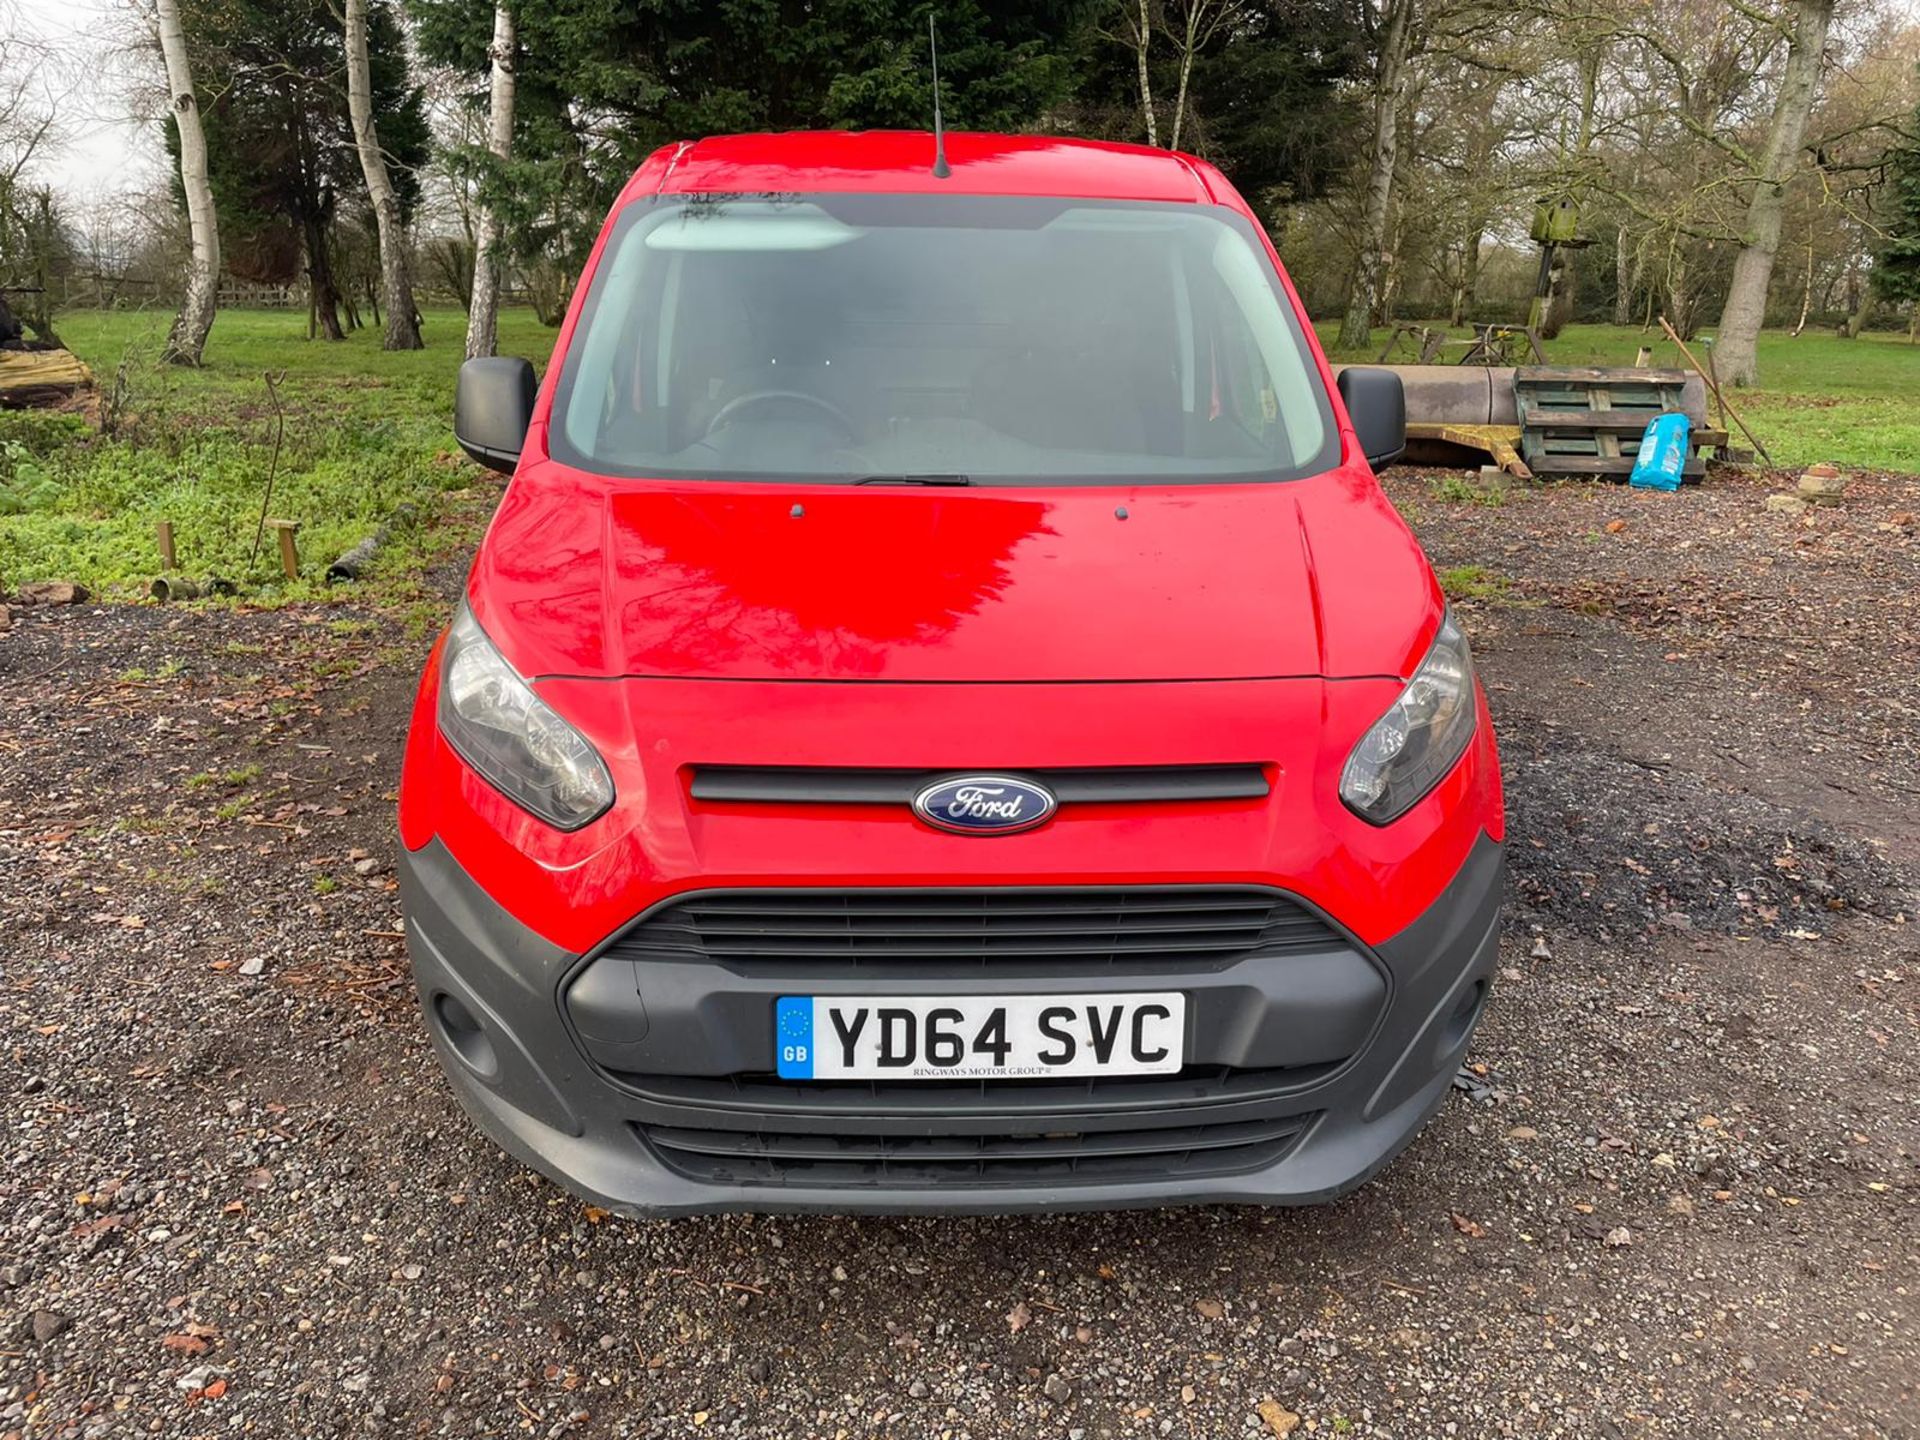 2014/64 REG FORD TRANSIT CONNECT 210 ECONETIC 1.6 DIESEL RED PANEL VAN, SHOWING 0 FORMER KEEPERS - Image 2 of 14